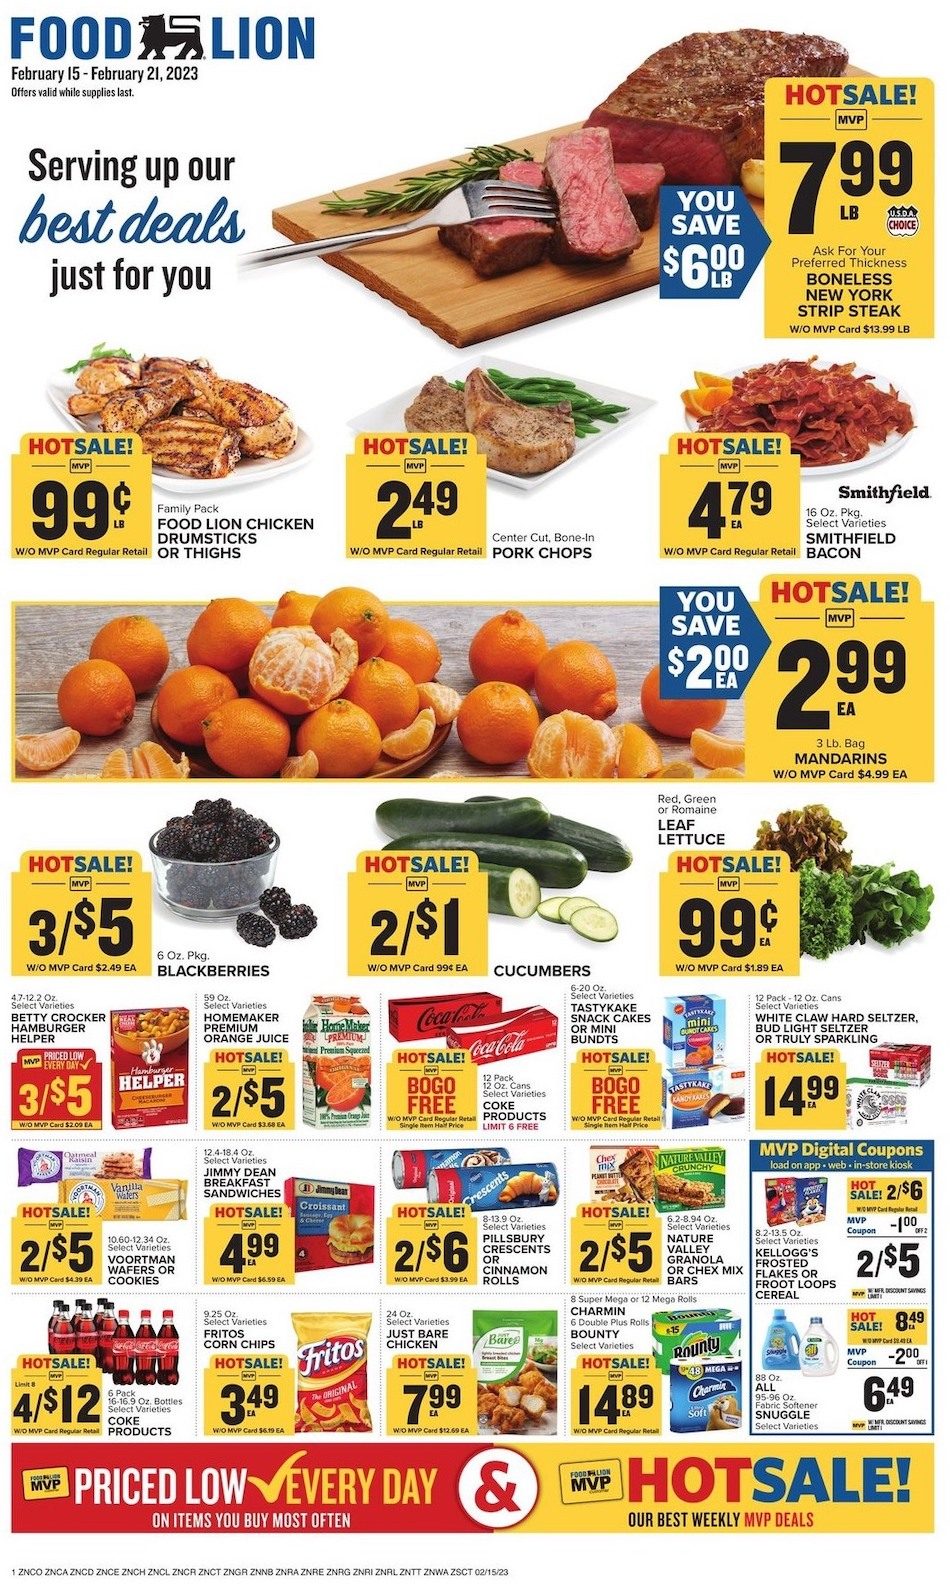 Food Lion Weekly Ad 15th – 21st February 2023 Page 1